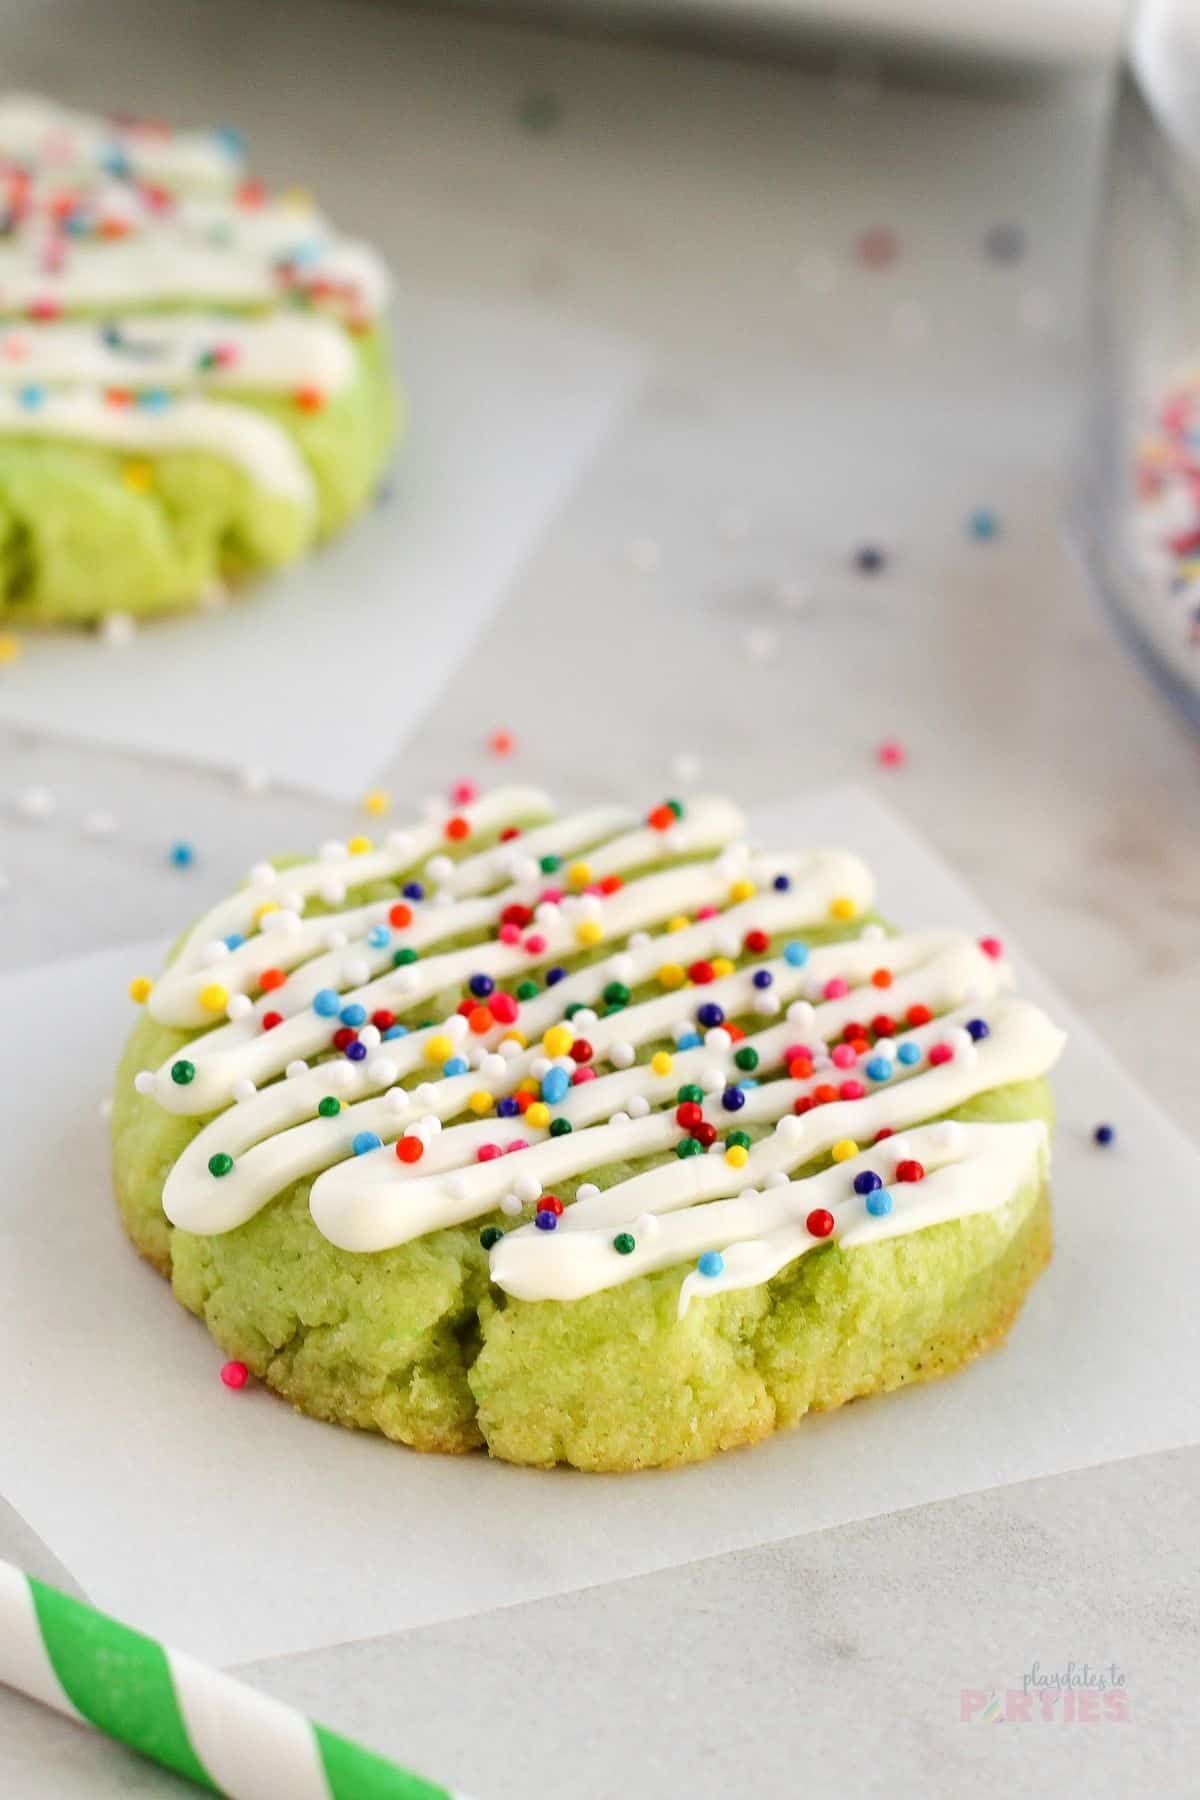 A lime cookie decorated with white chocolate and sprinkles.